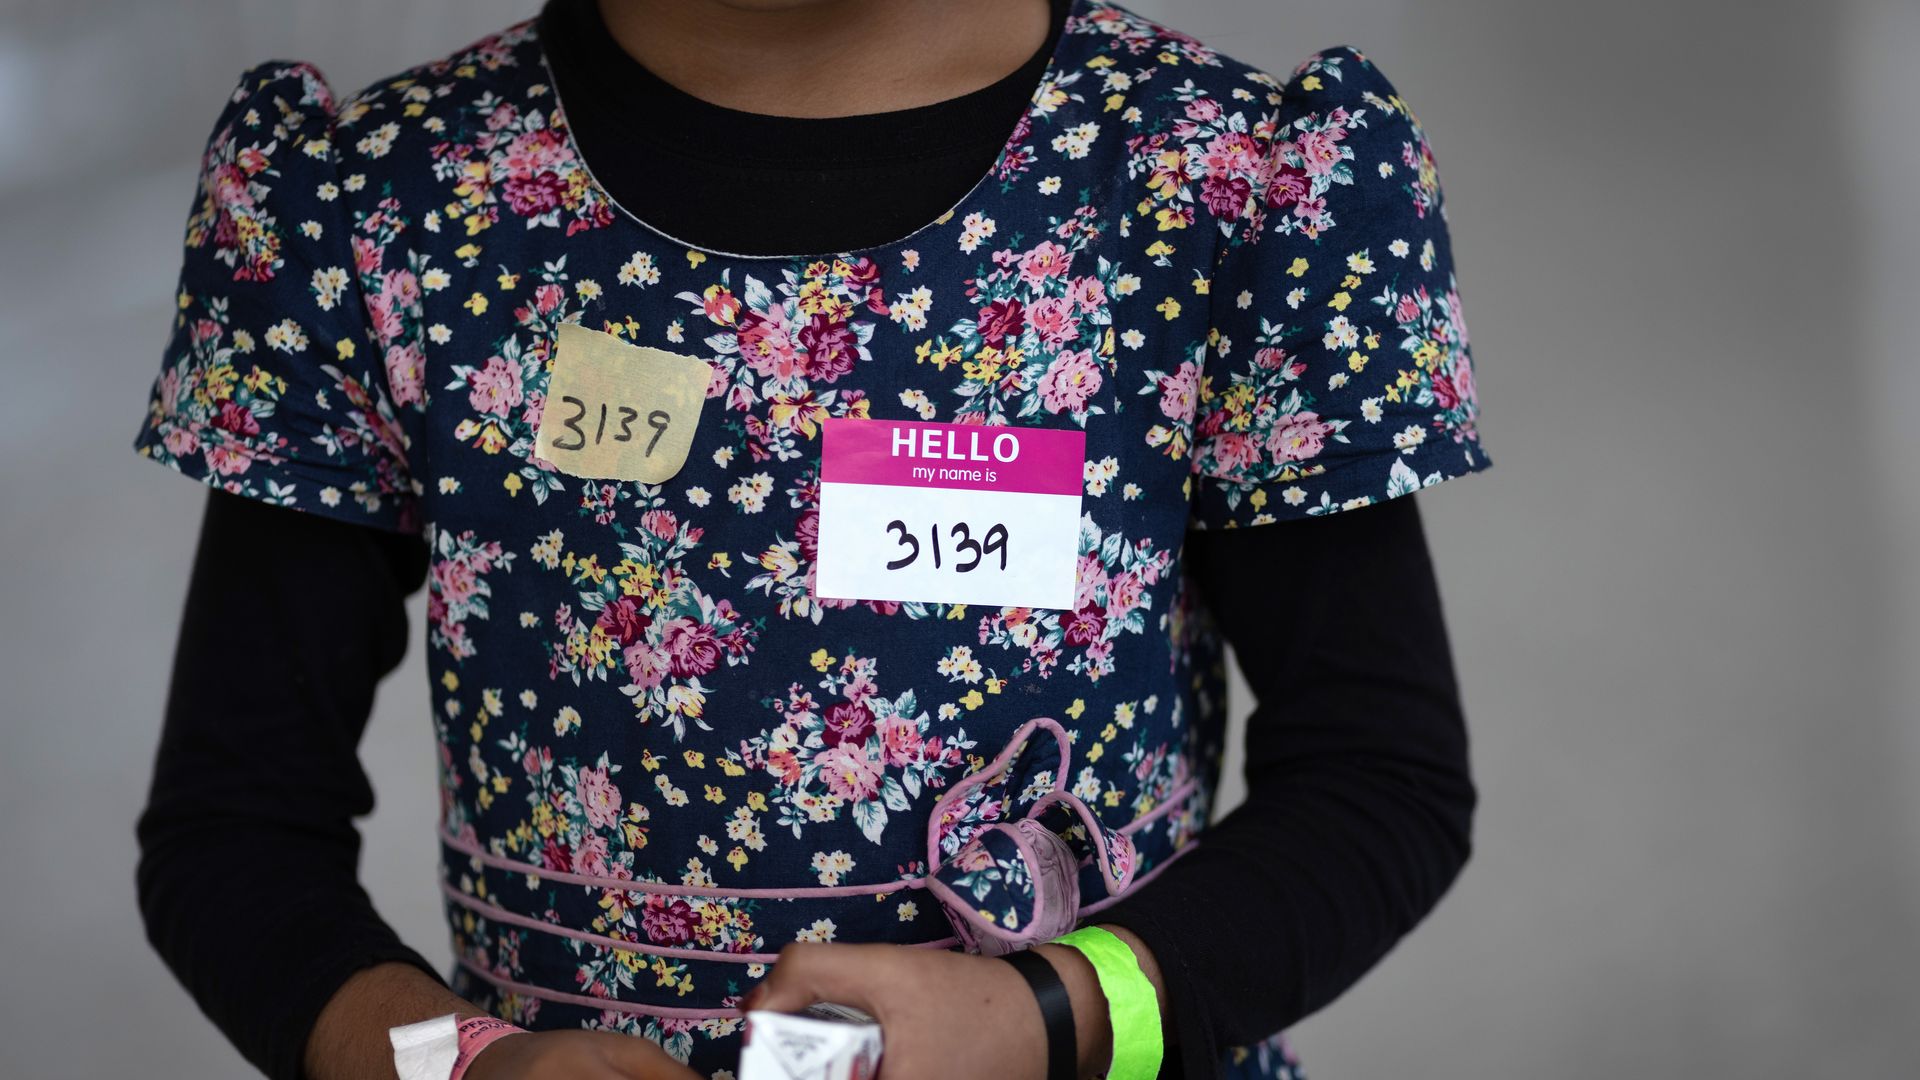 A girl in a dress with a name tag.